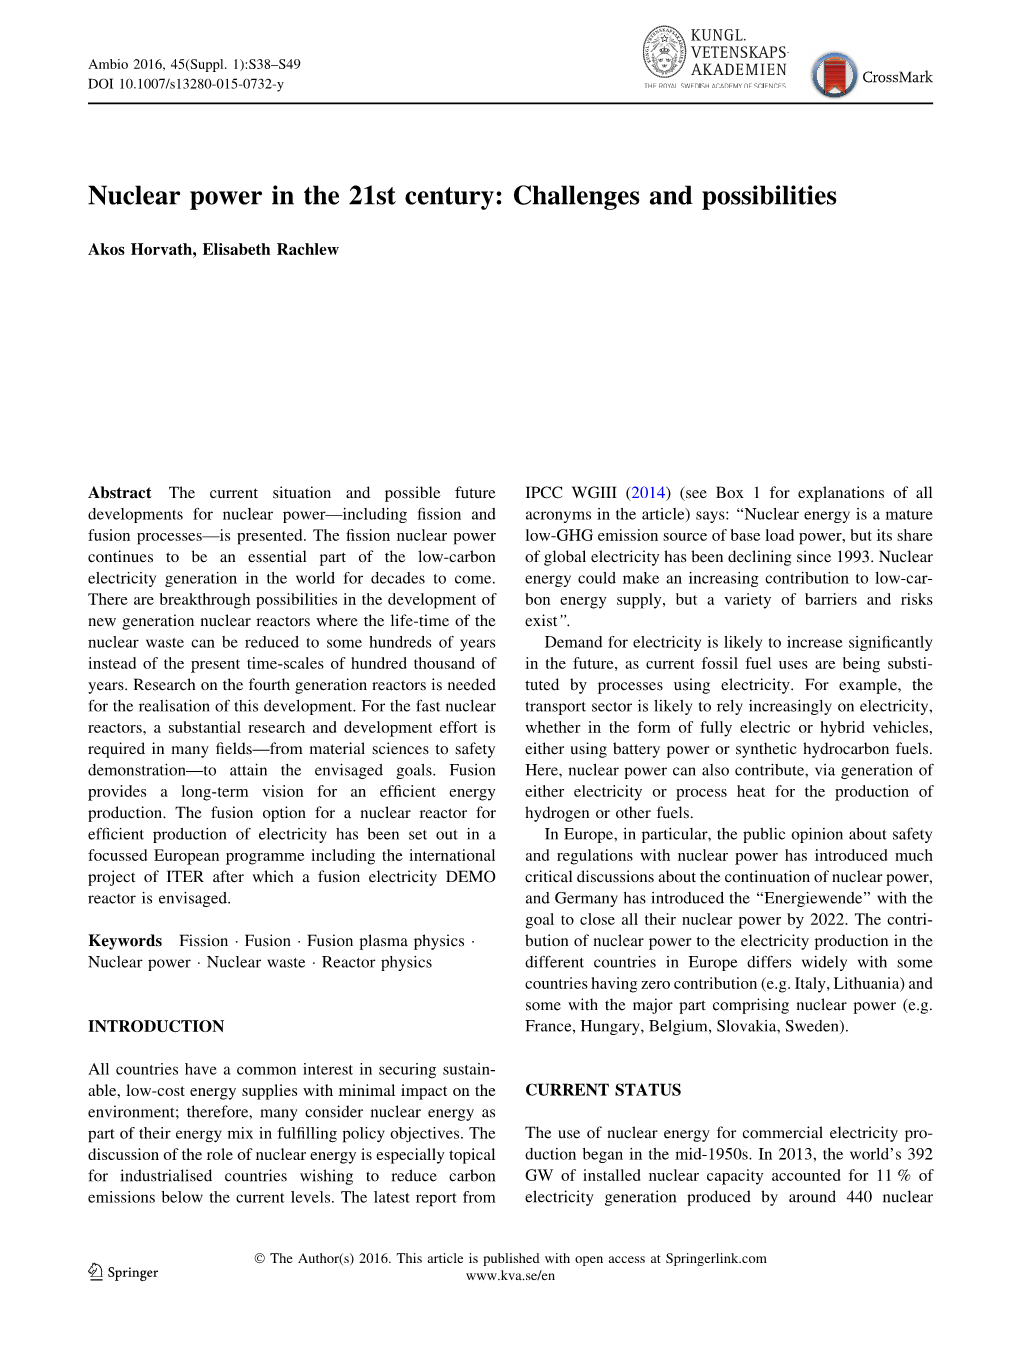 Nuclear Power in the 21St Century: Challenges and Possibilities